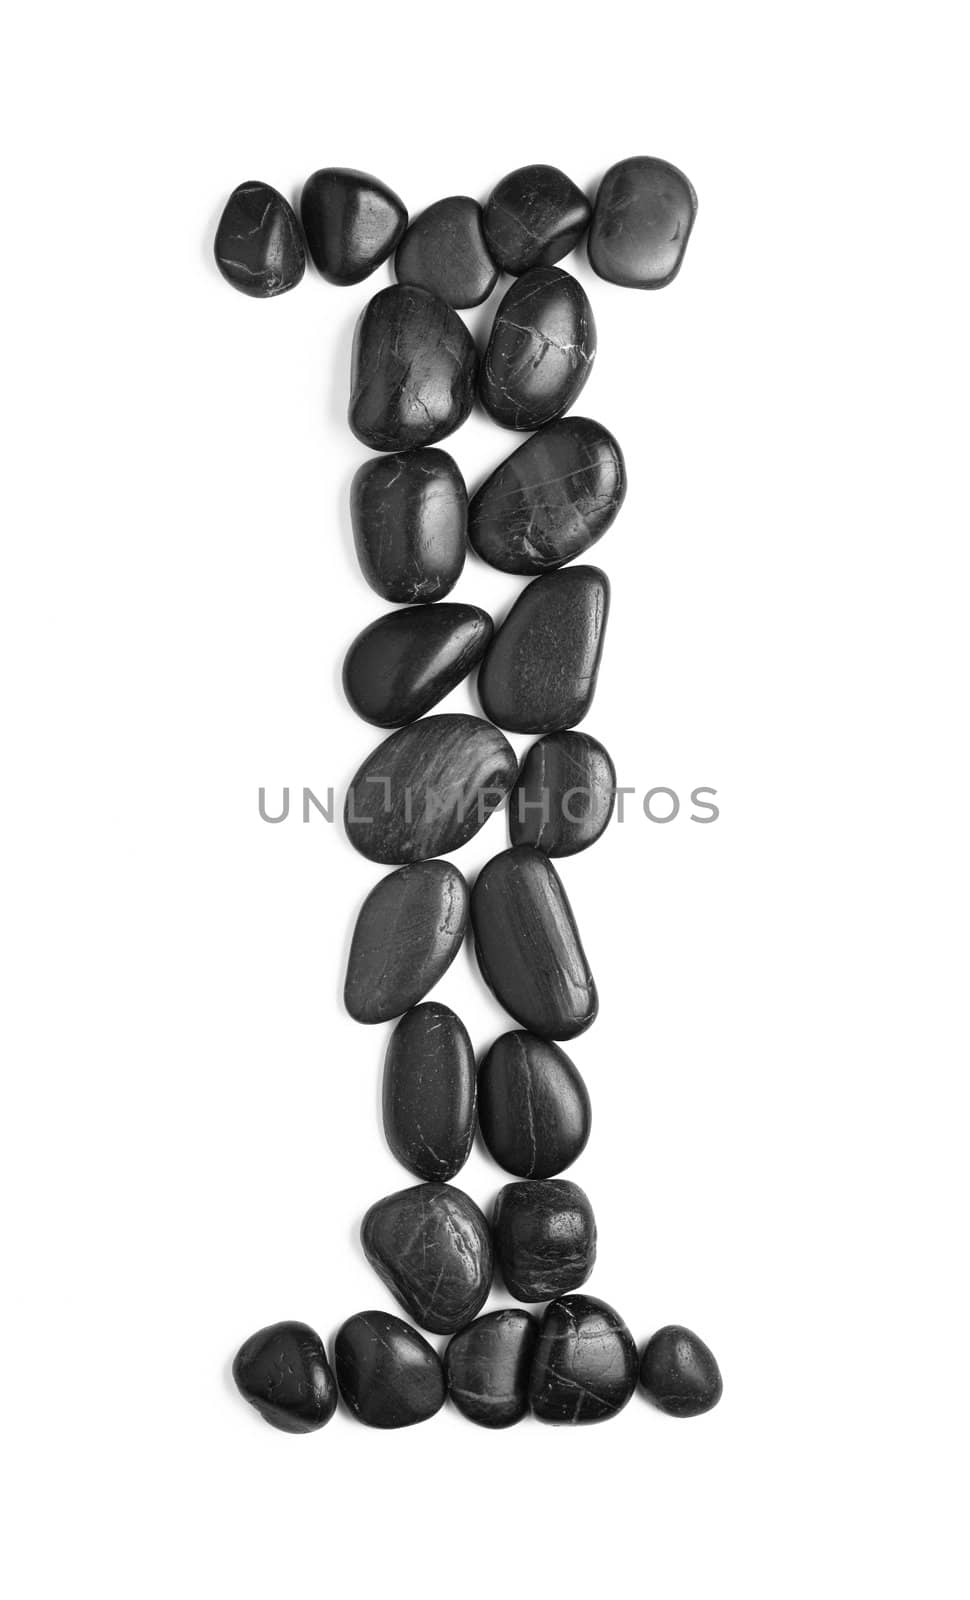 Black rock letter photographed against a white background.